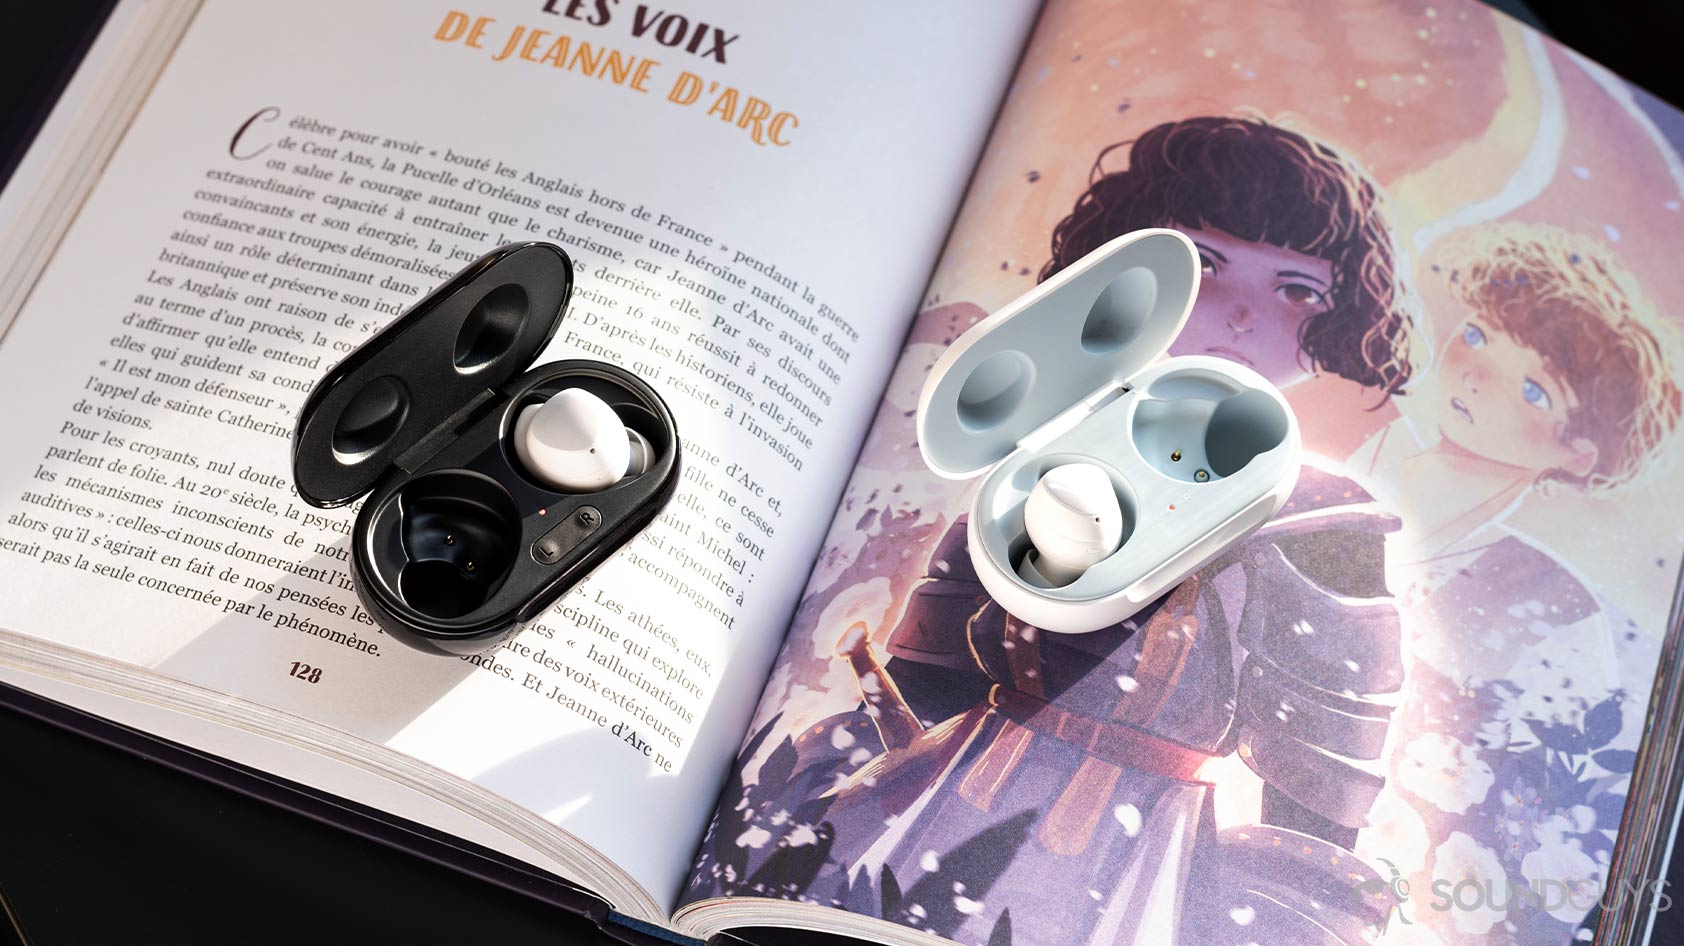 A picture of the Samsung Galaxy Buds Plus and Galaxy Buds with one earbud in each case atop an illustrated book.